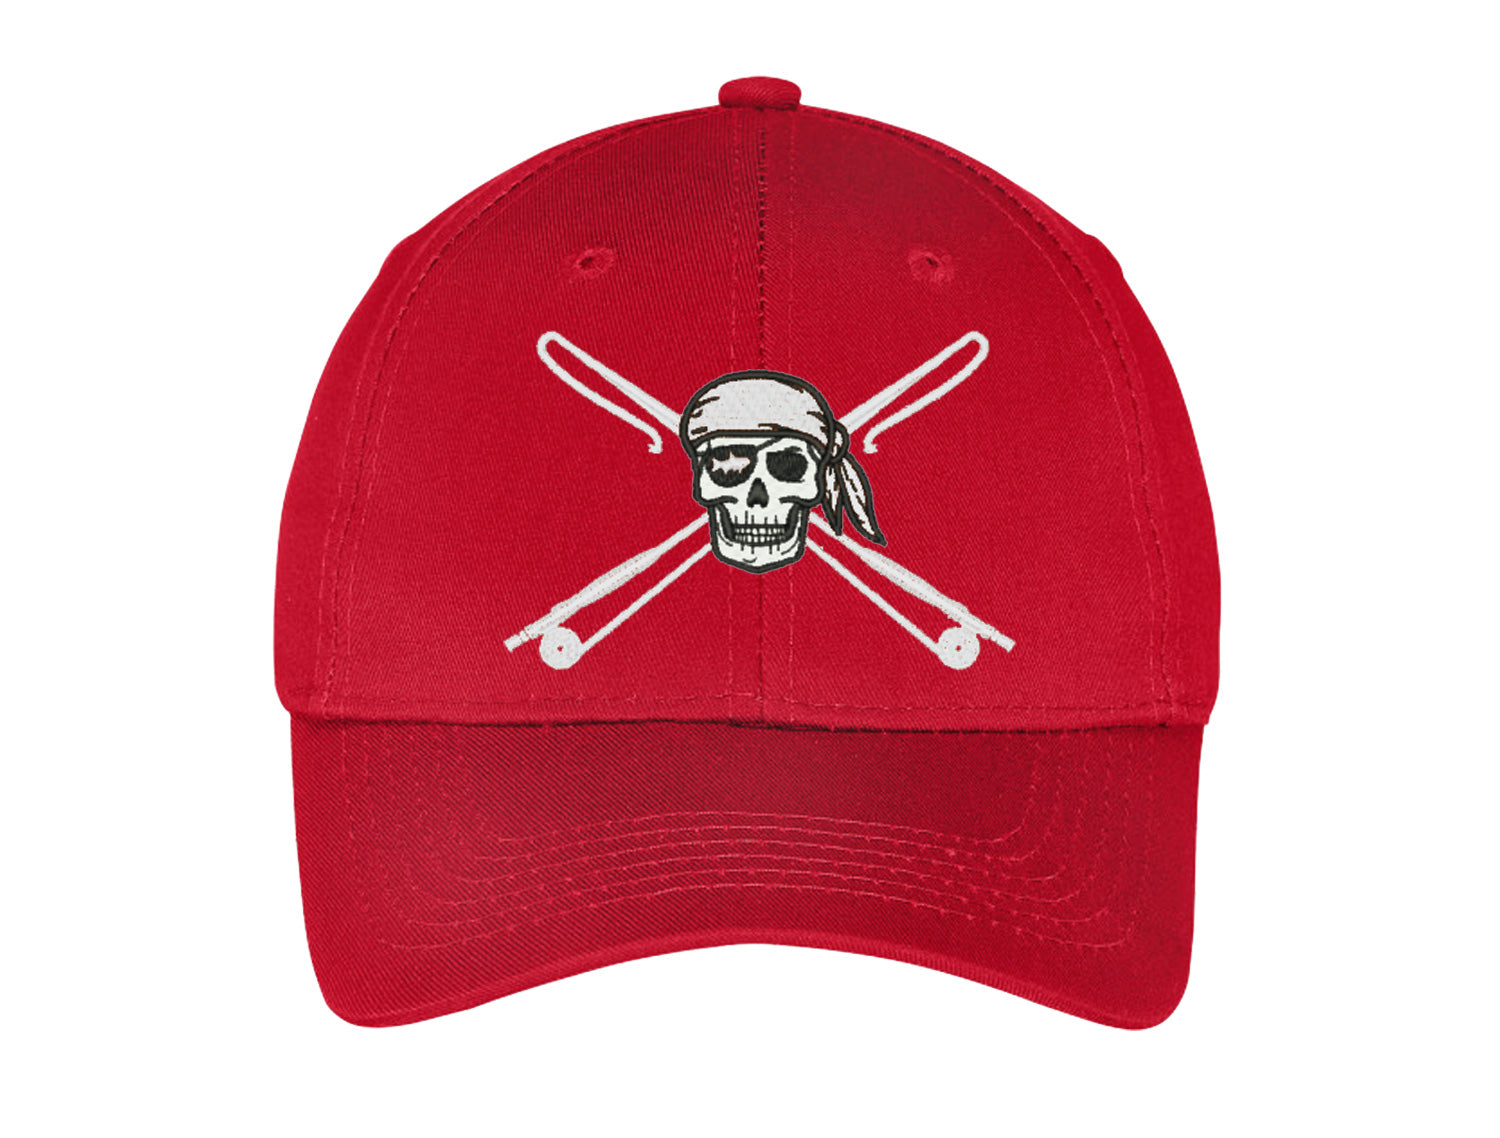 Youth Fishing Hats with Reel Fishy Pirate Skull & Rods Logo - Red